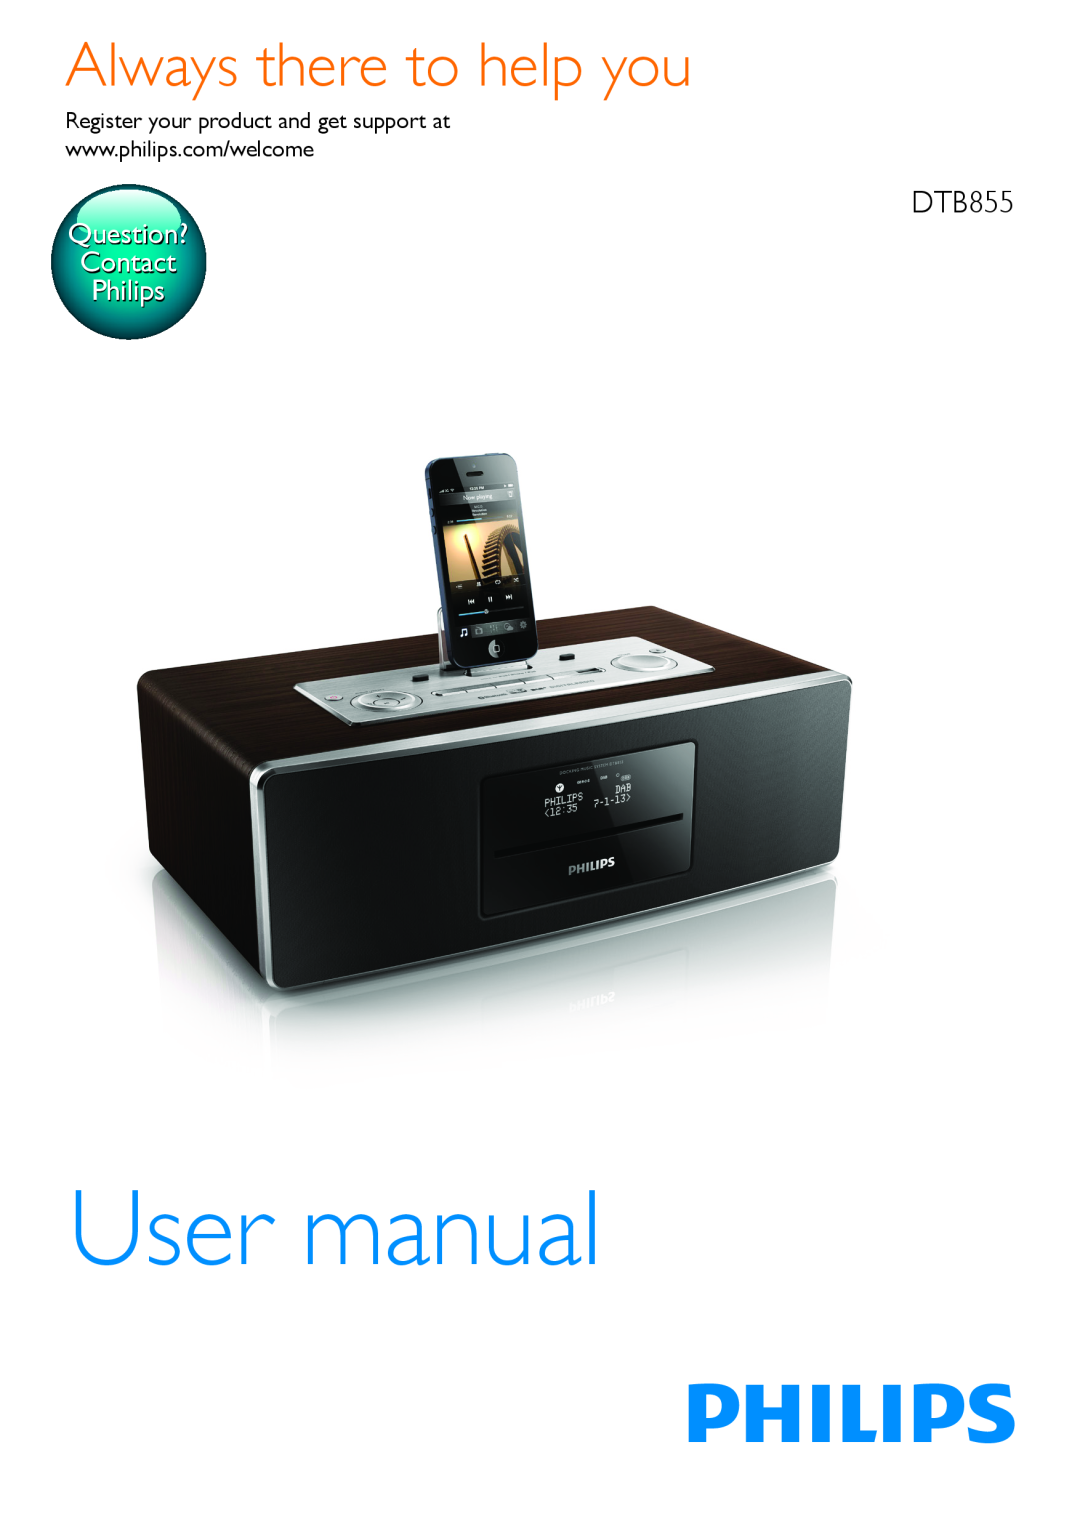 Philips DTB855 user manual Always there to help you, Question? Contact Philips 